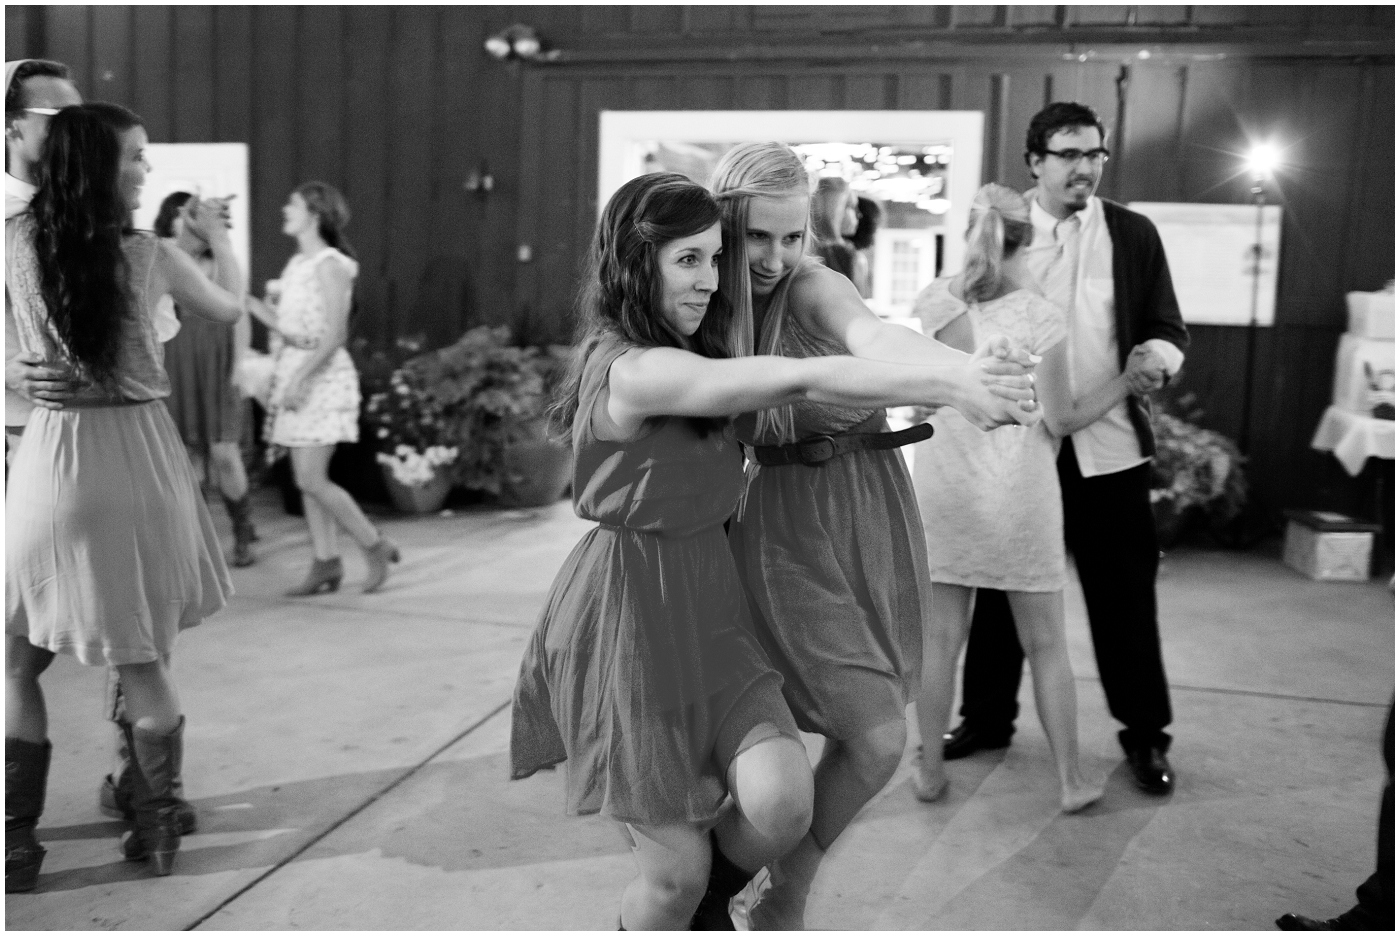 picture of wedding guests dancing